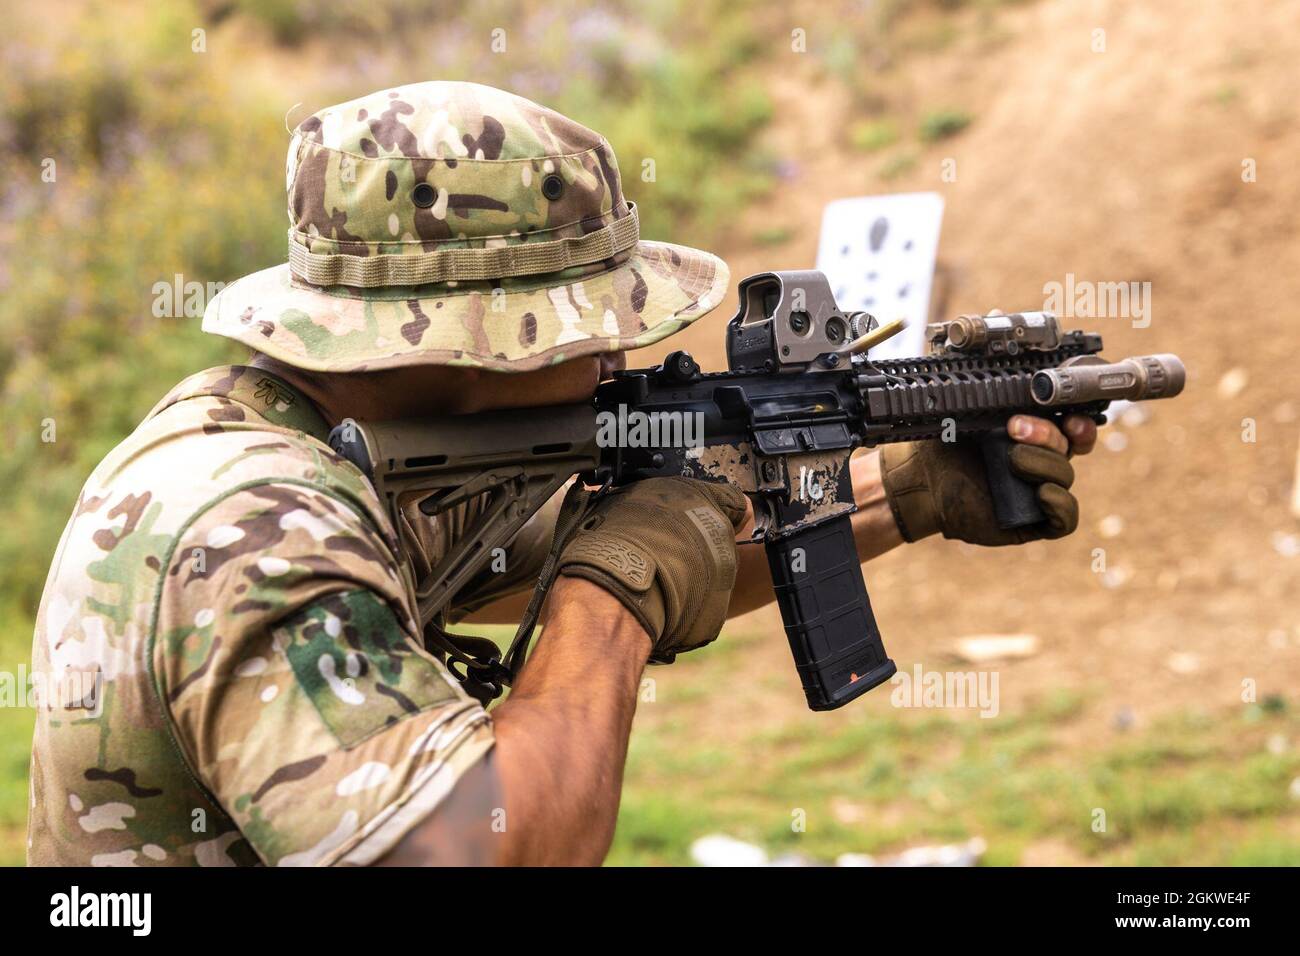 A U.S. Navy SEAL fires a MK18 rifle at a range during exercise Sea Breeze 21 in Ochakiv, Ukraine, July 8, 2021. Sea Breeze 21 is a U.S. and Ukraine co-hosted multinational maritime exercise held in the Black Sea designed to enhance interoperability of participating nations and strengthen maritime security within the region. Stock Photo